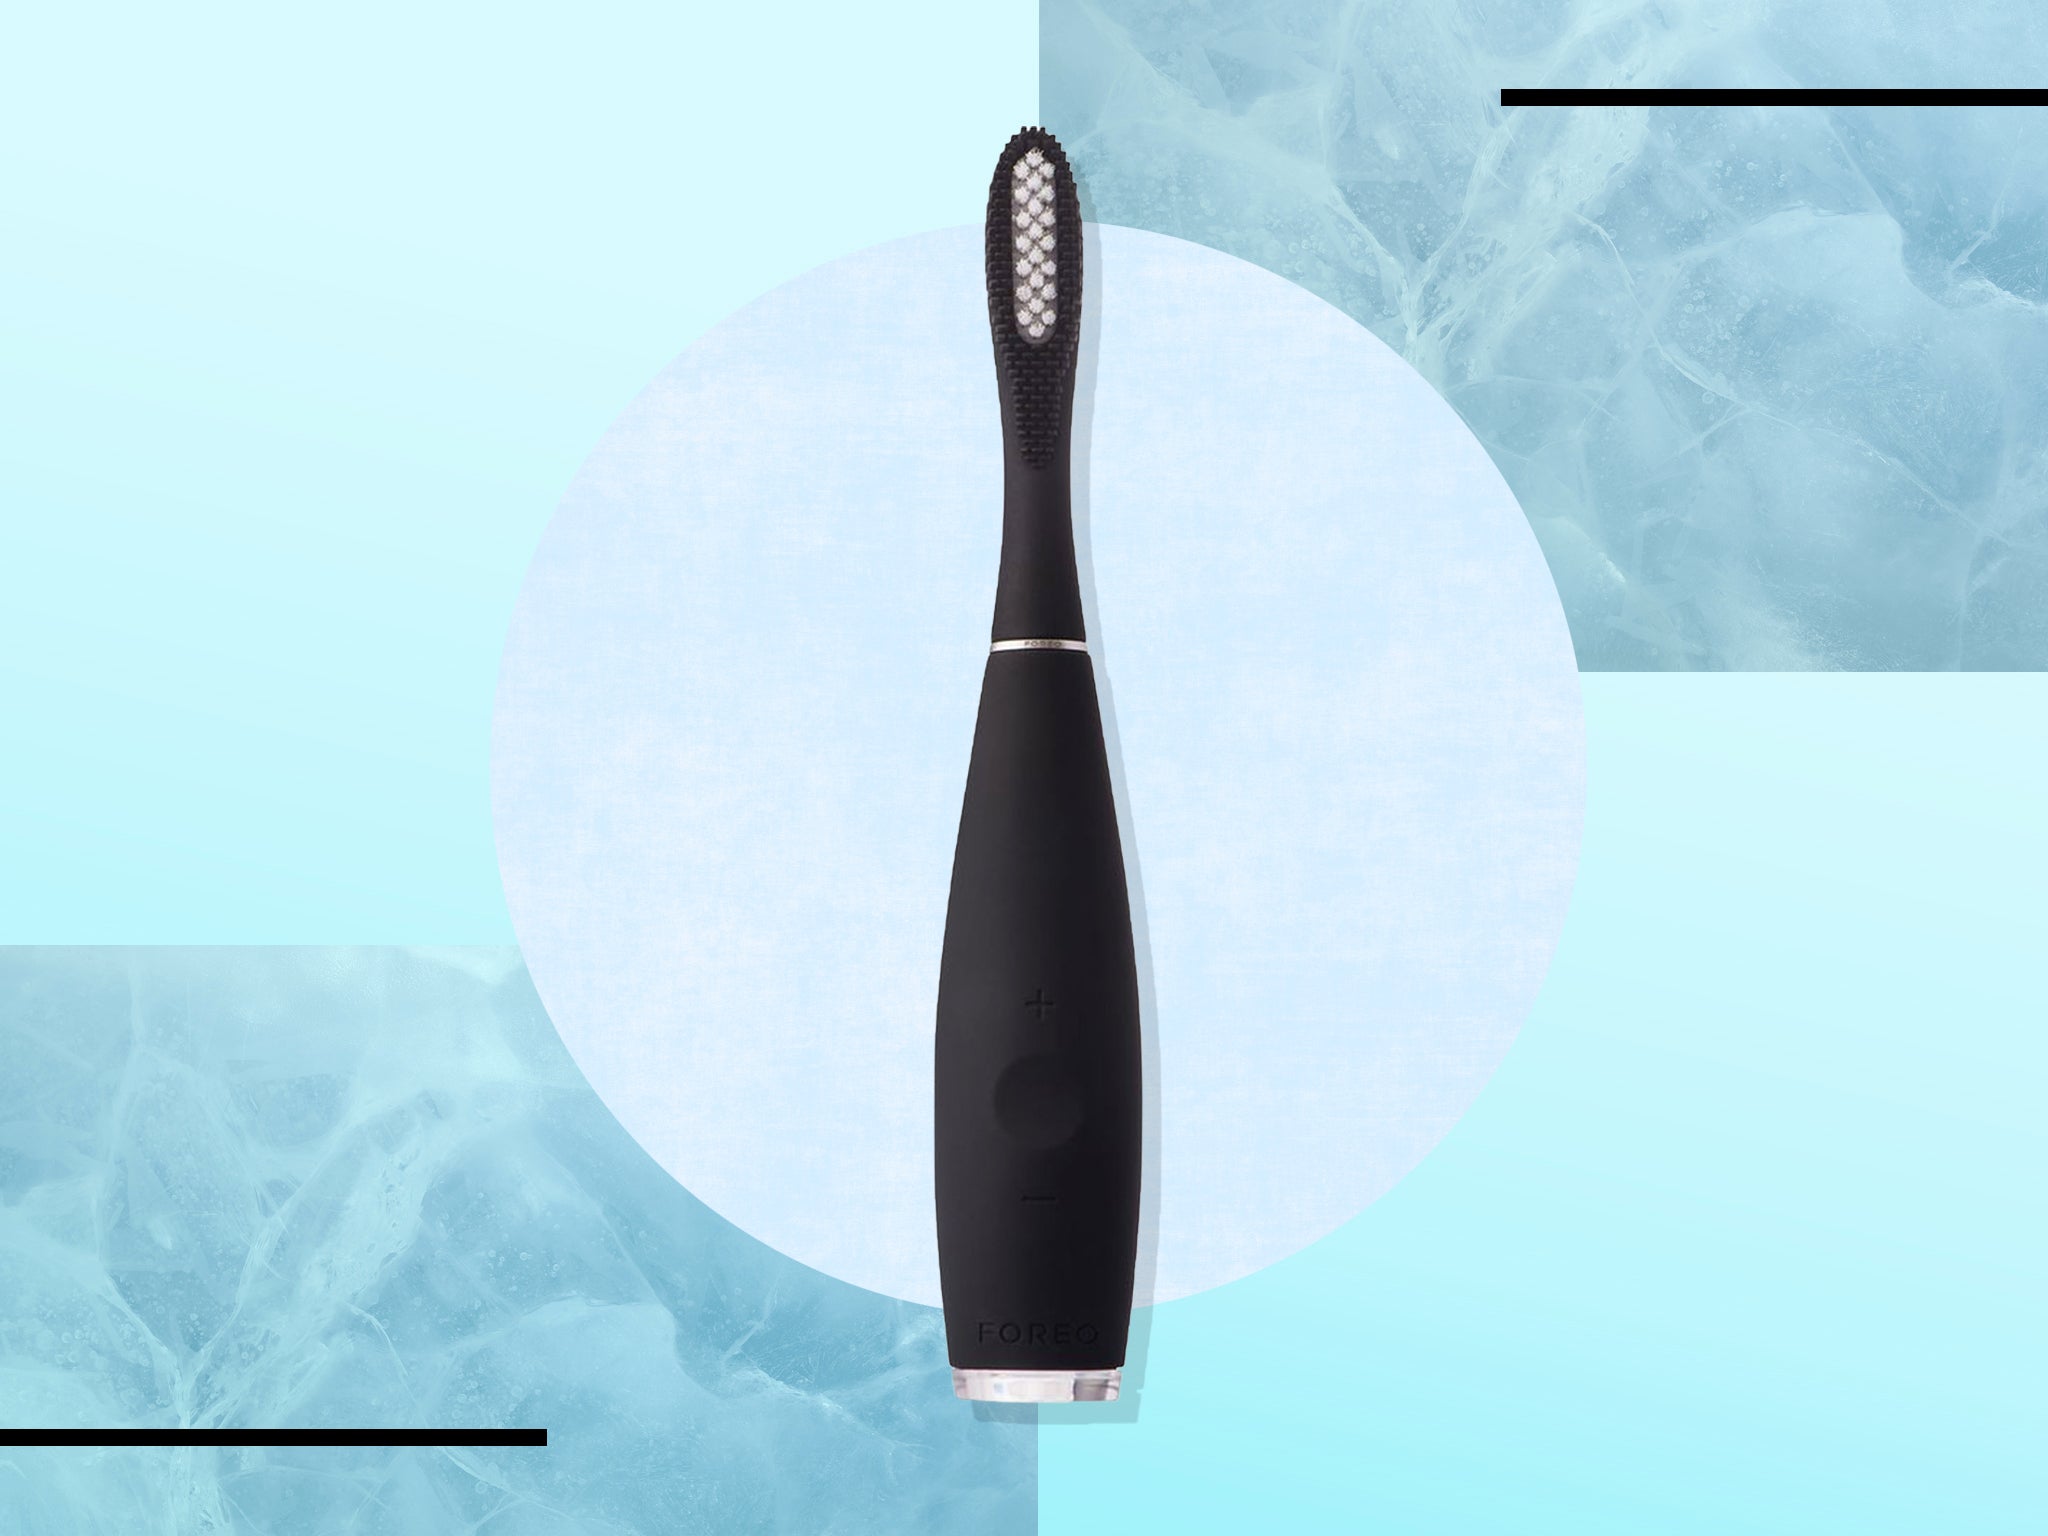 The latest toothbrush has a whopping 16 intensity settings